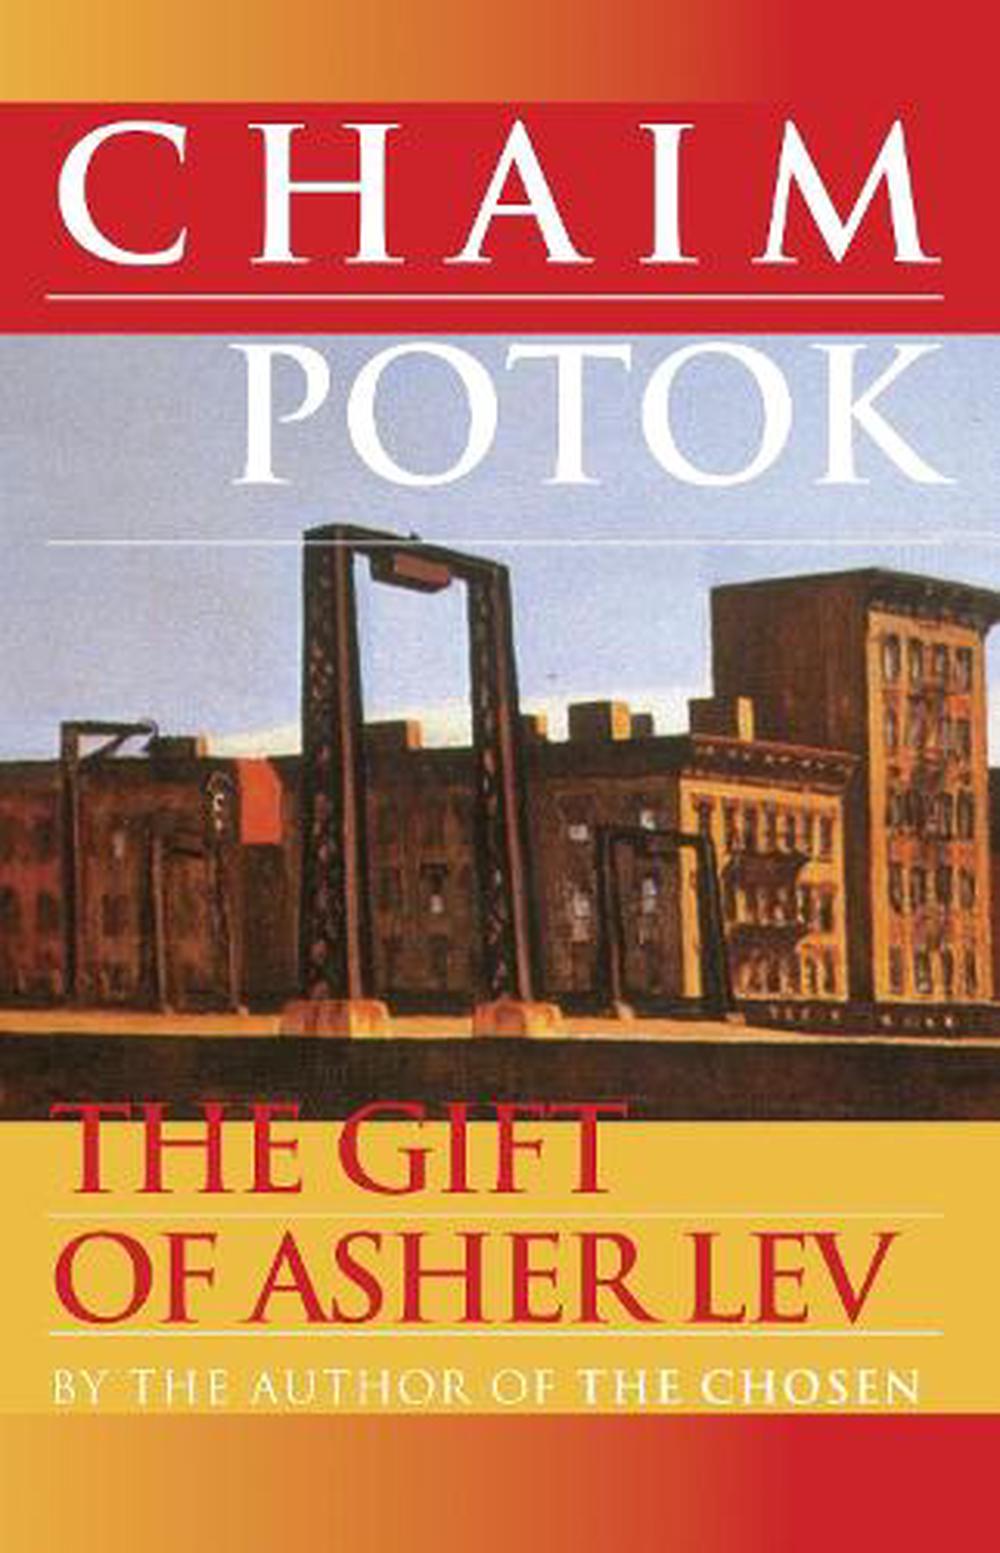 asher lev book